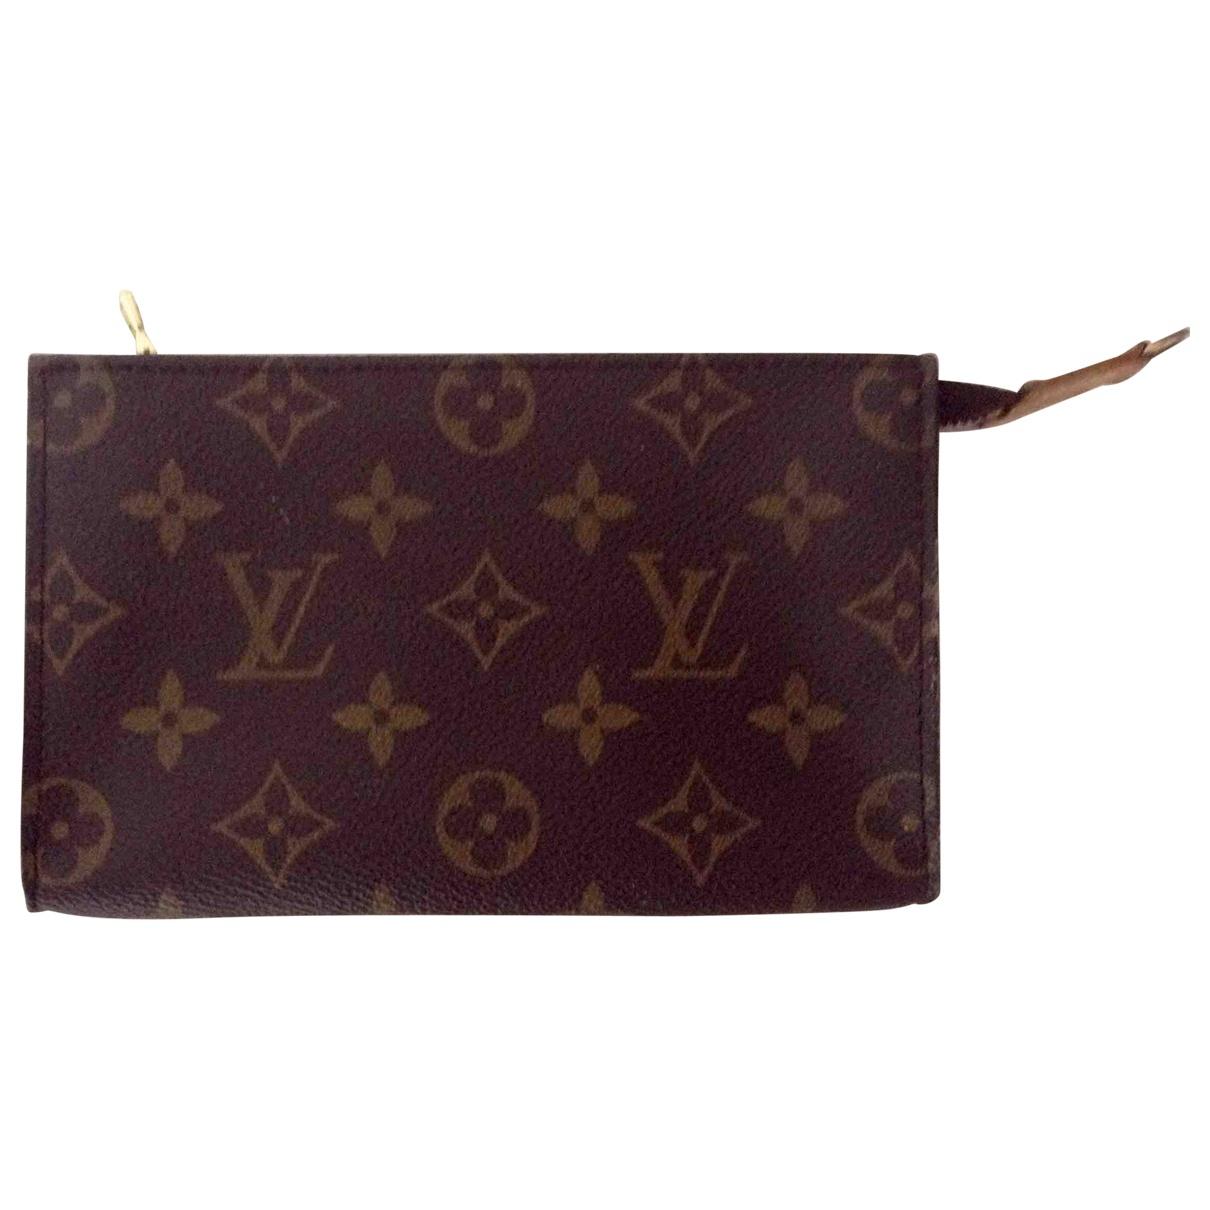 Louis Vuitton Clutch Bag Uk Selfridges | Confederated Tribes of the Umatilla Indian Reservation